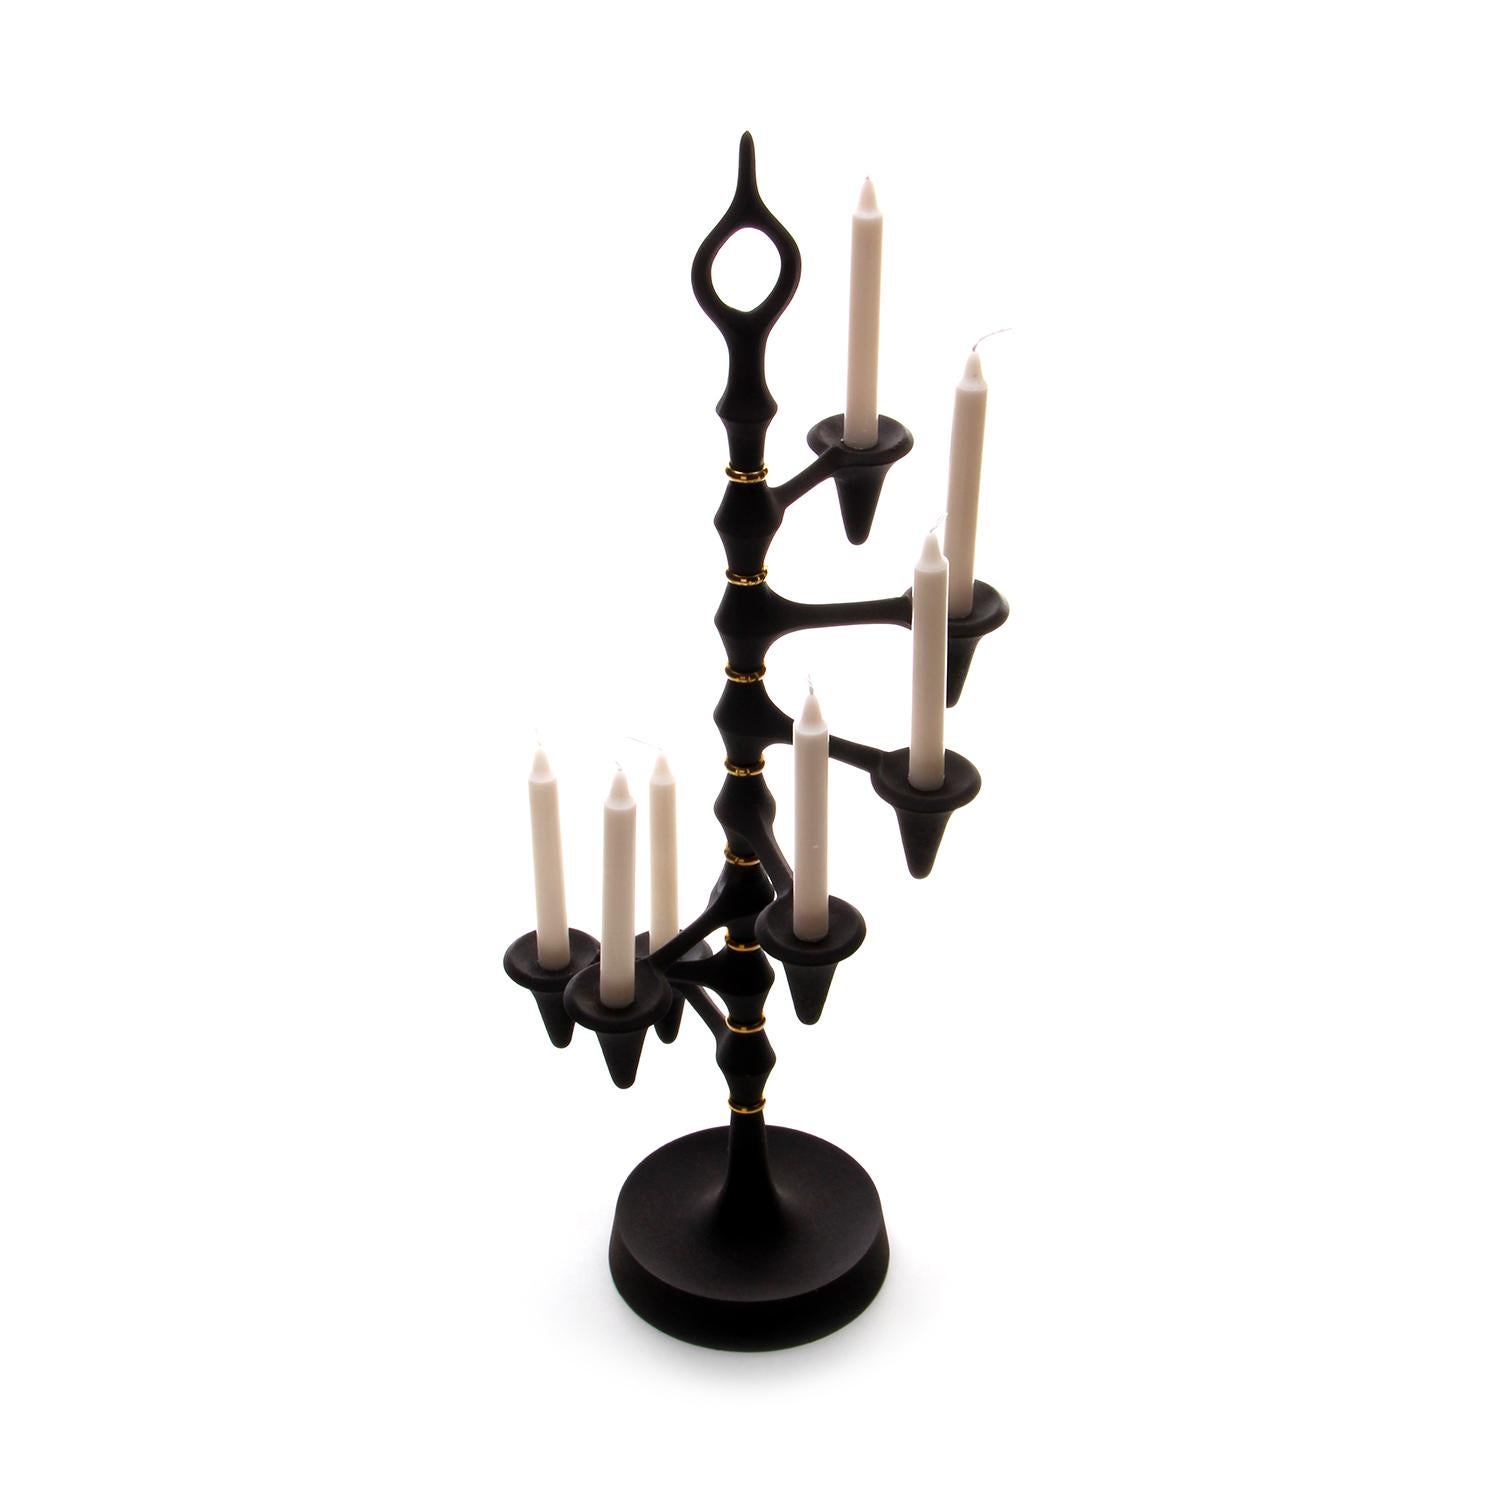 Candle tree, no. 1419 by Jens H Quistgaard for Dansk Designs in the late 1950s - Mid-Century Modern Danish cast iron candleholder with box of new white tapers included, in rare excellent vintage condition.

An elegant cast iron candelabrum,